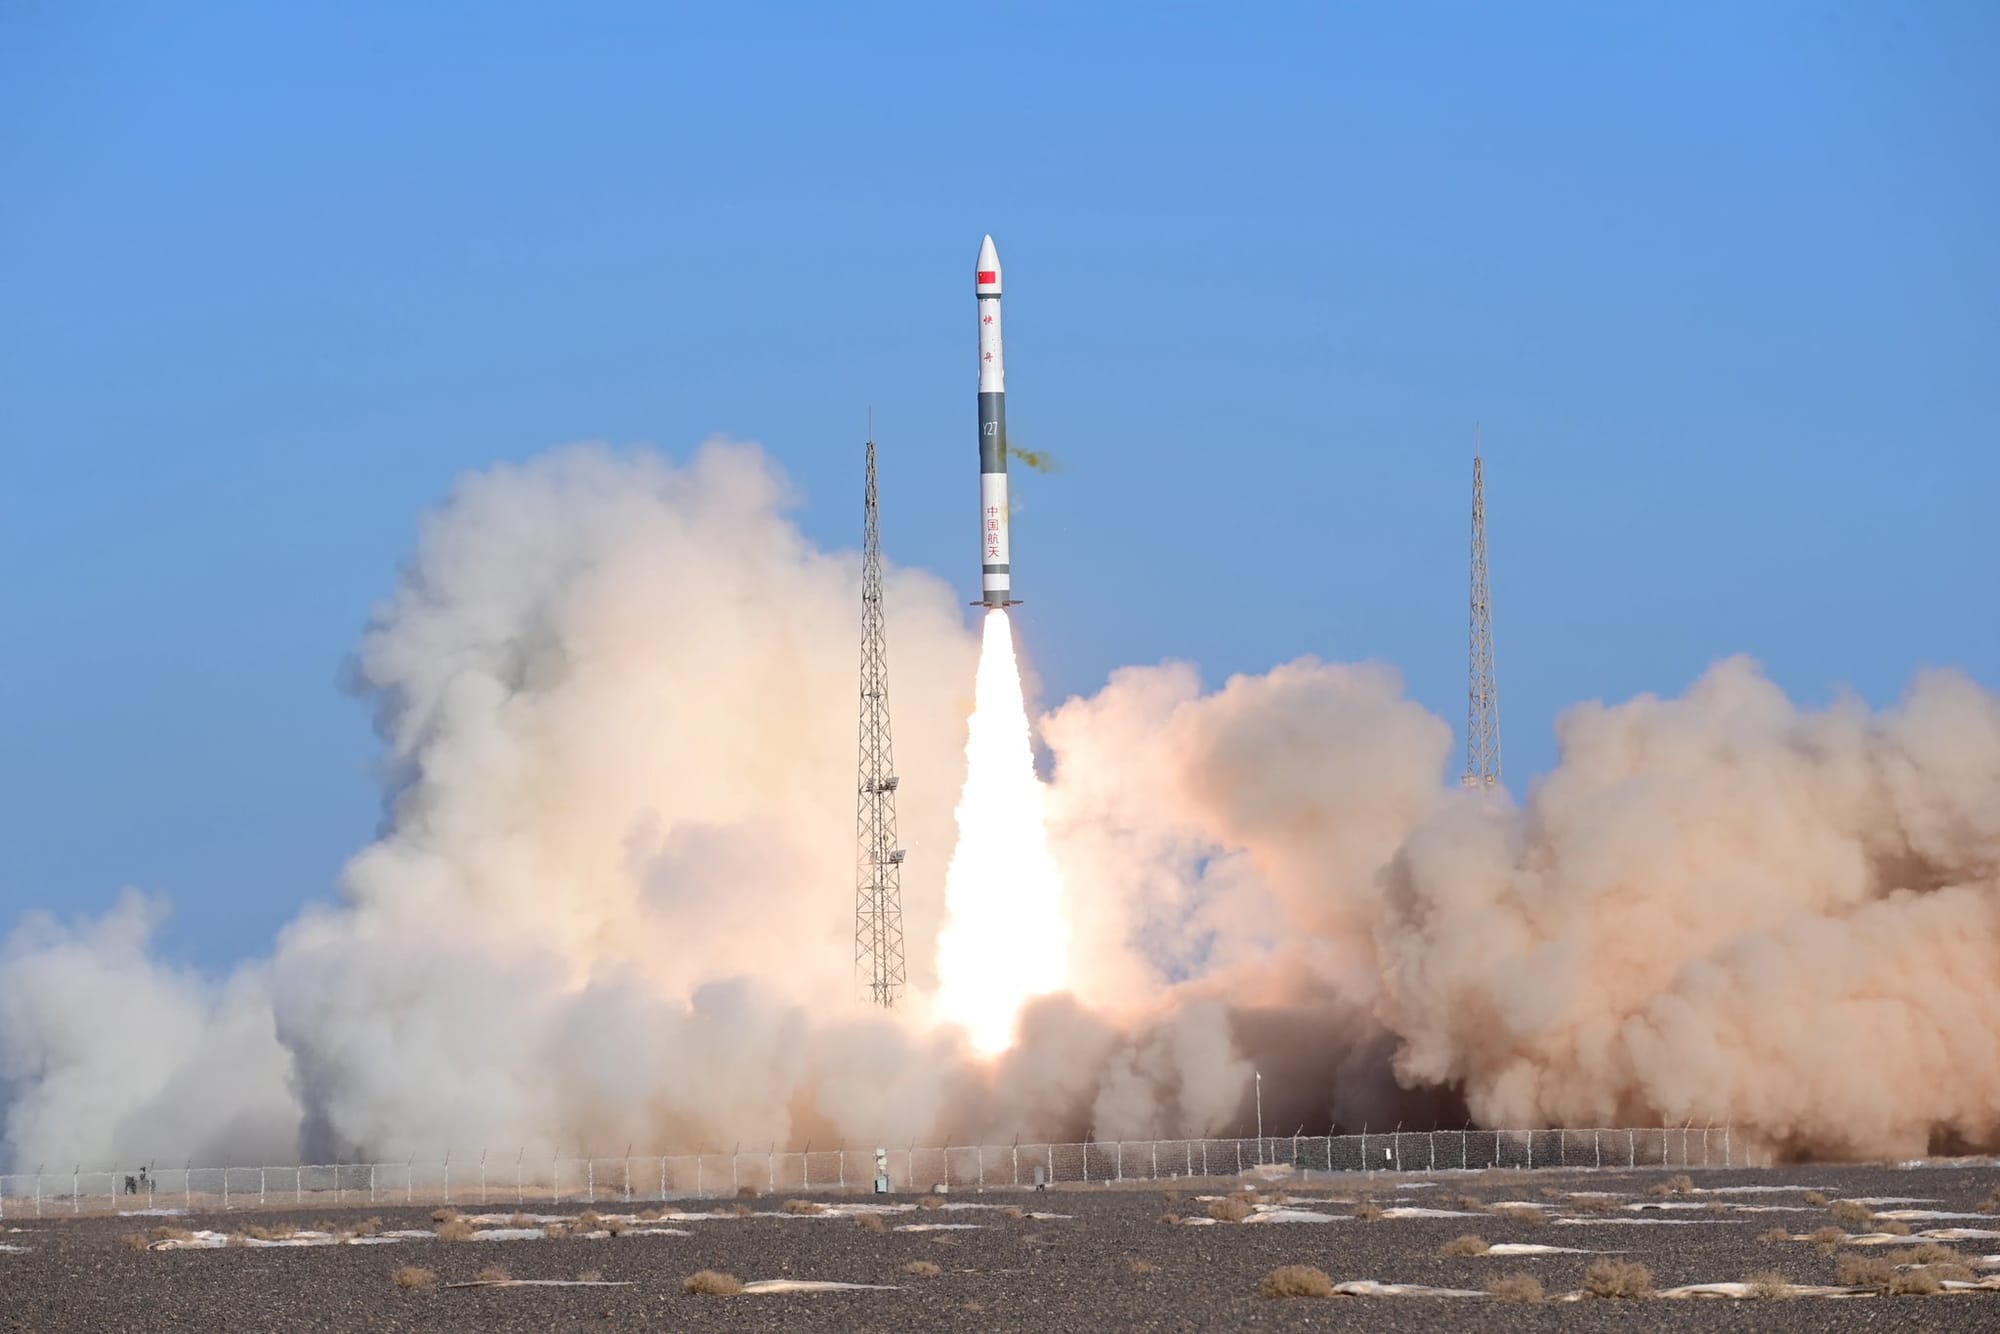 Kuaizhou-1A lifting off from its launch pad at the Jiuquan Satellite Launch Center with Tianmu-1 19-22.